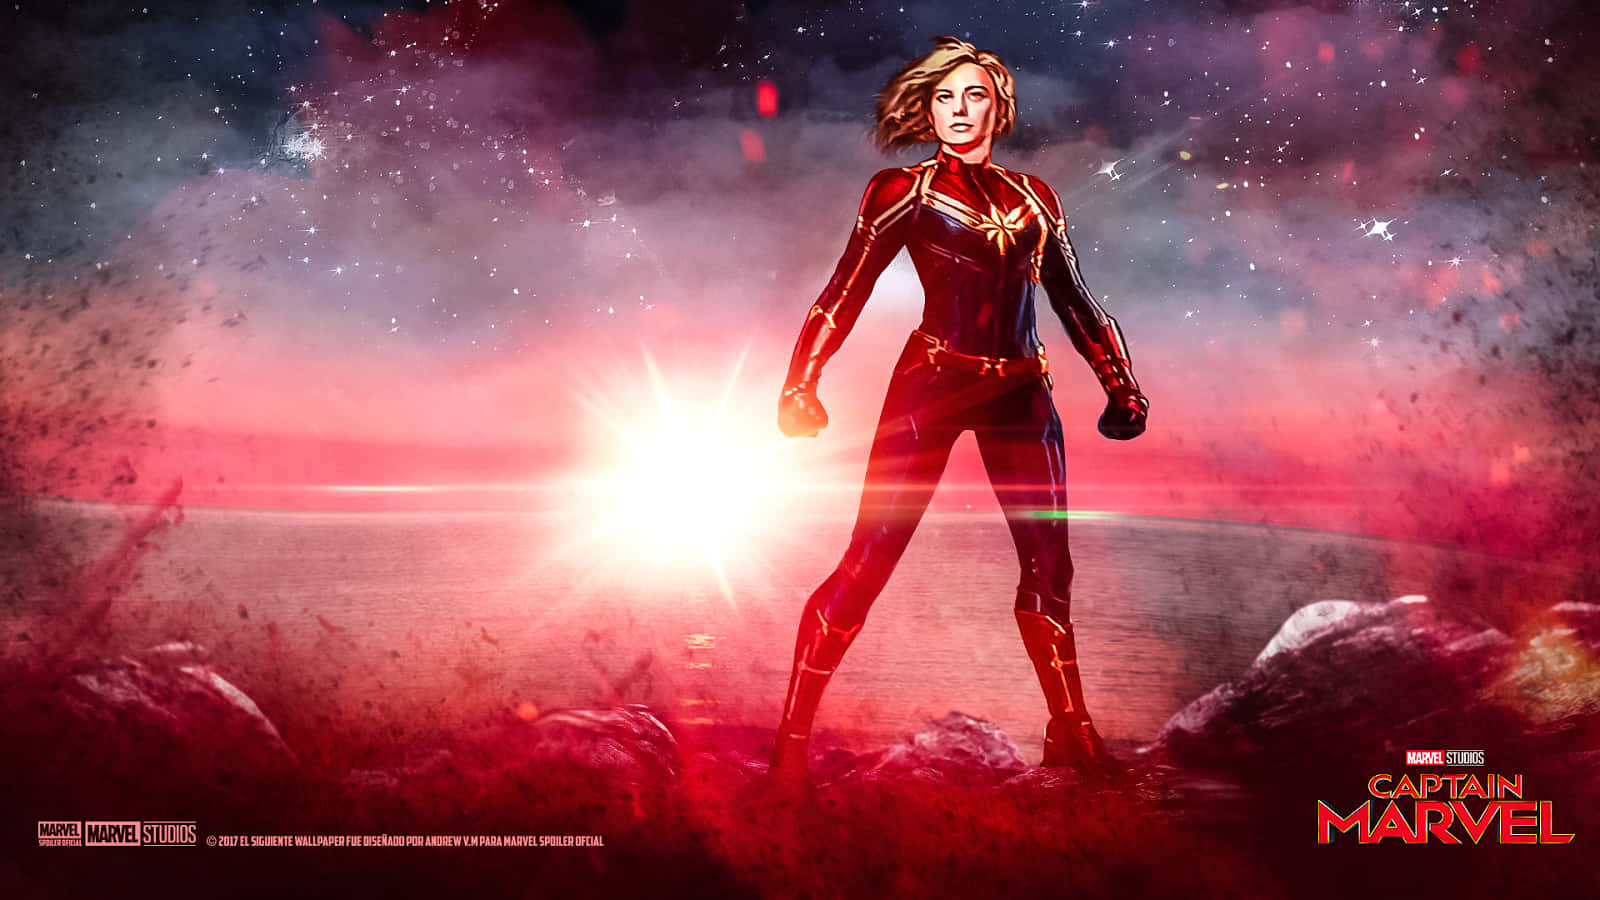 Ready for Action: Brie Larson as Captain Marvel in the Marvel Cinematic Universe